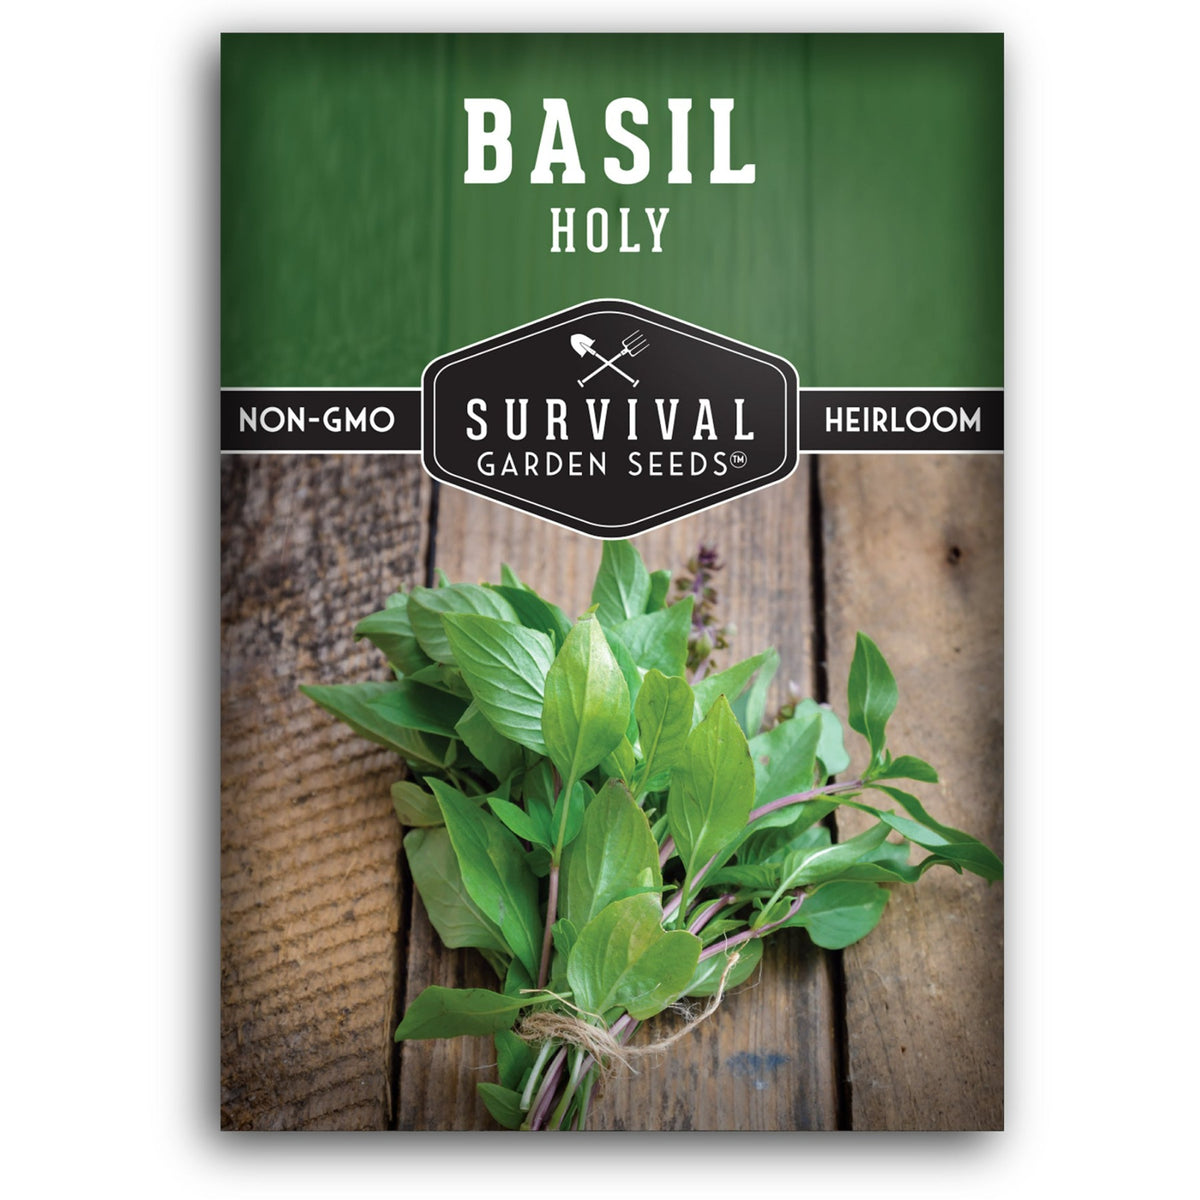 Holy Basil seeds for planting